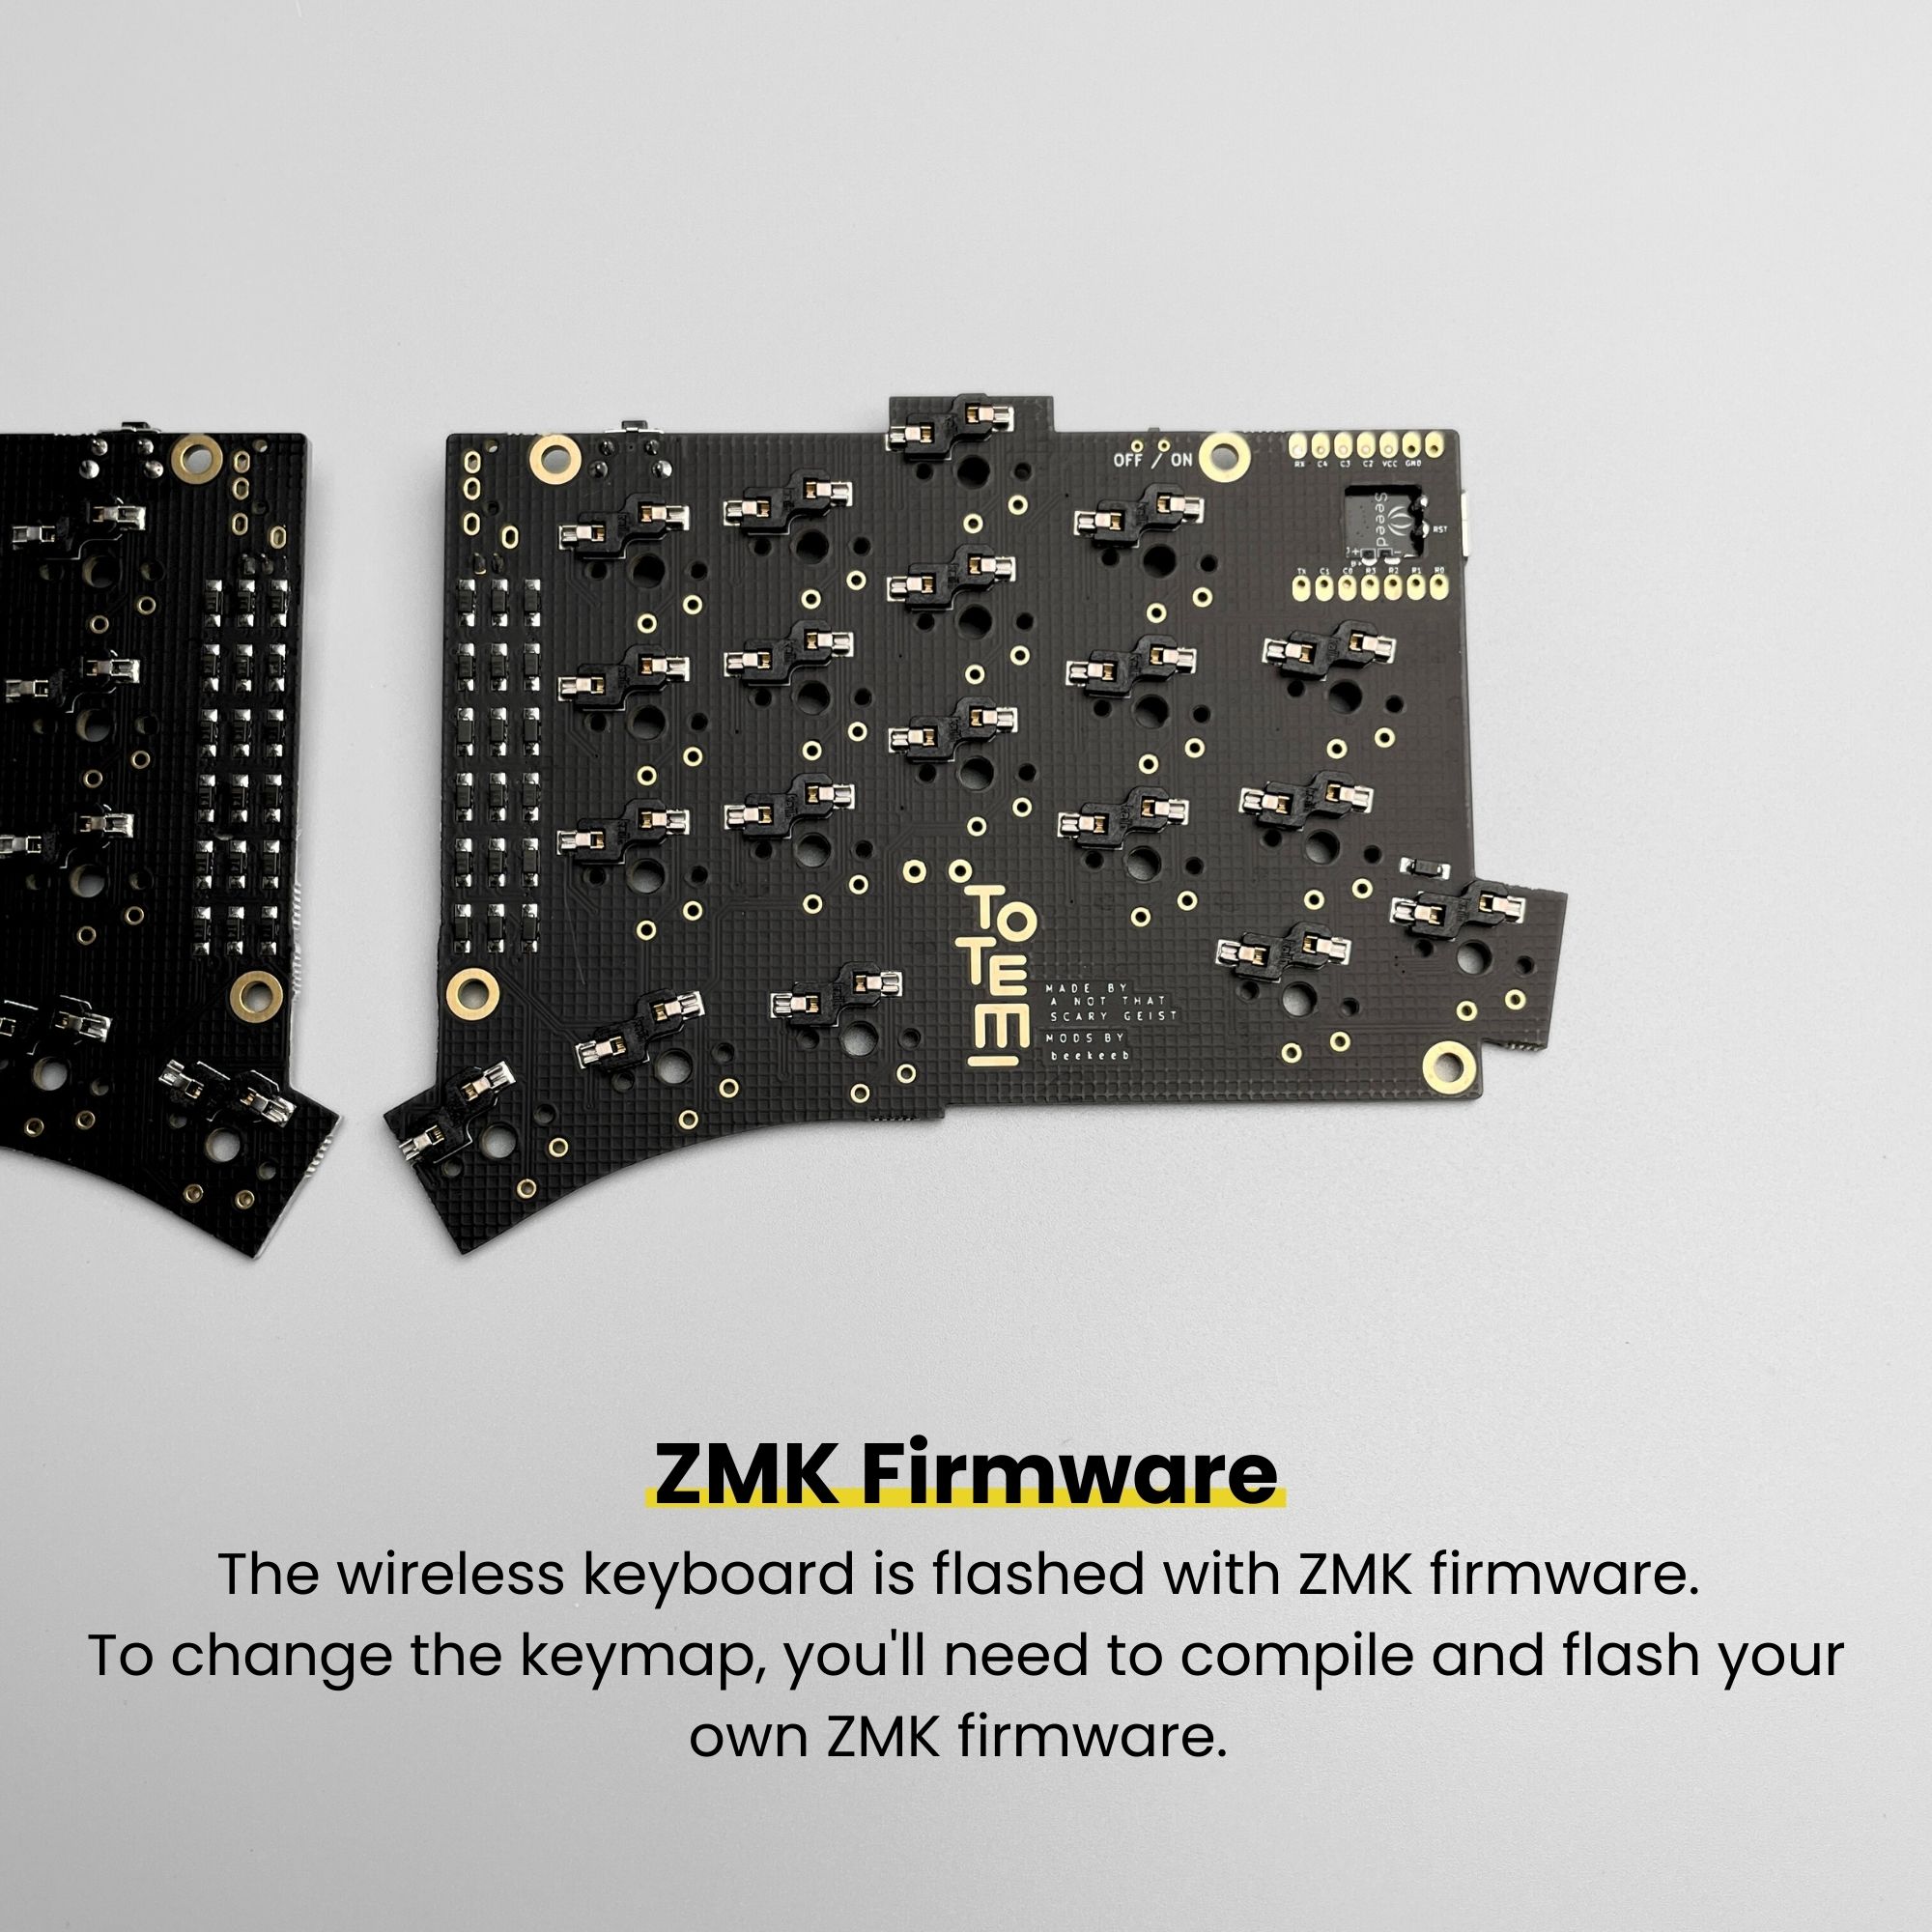 Prebuilt wireless TOTEM keyboard PCB with JST battery socket flashed with ZMK firmware